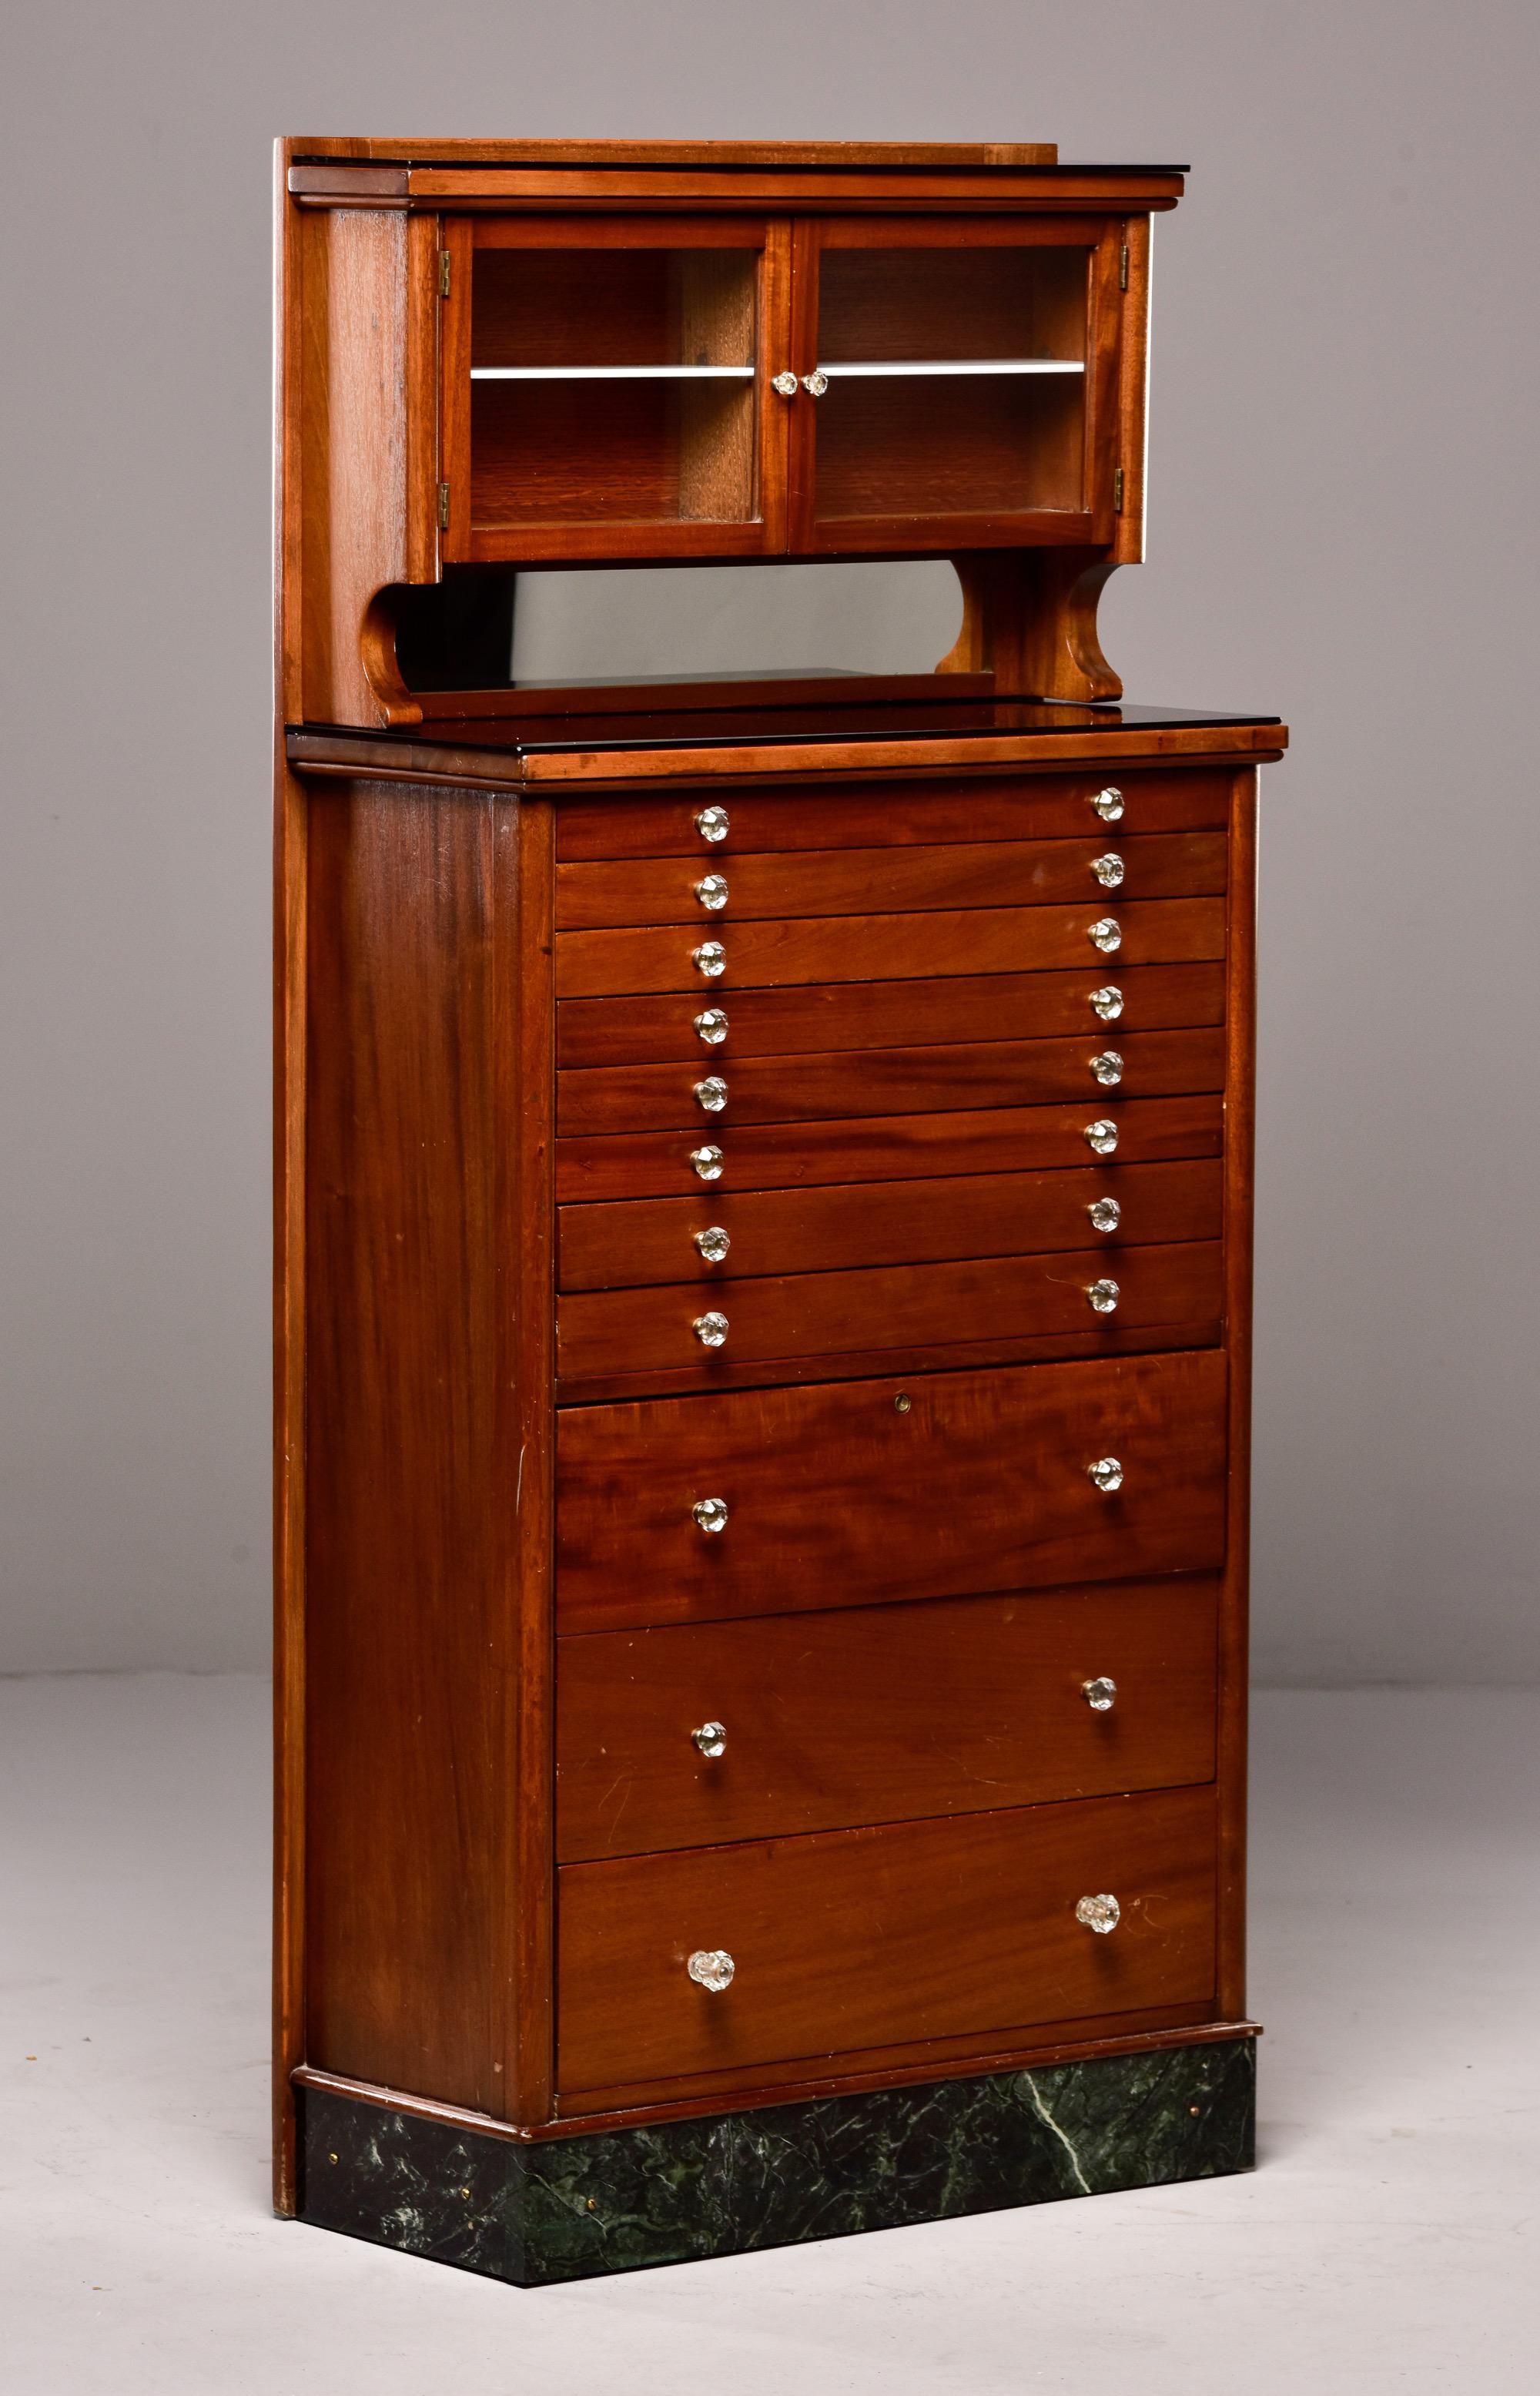 American Early 20th C Tall Medical Cabinet with Drawers